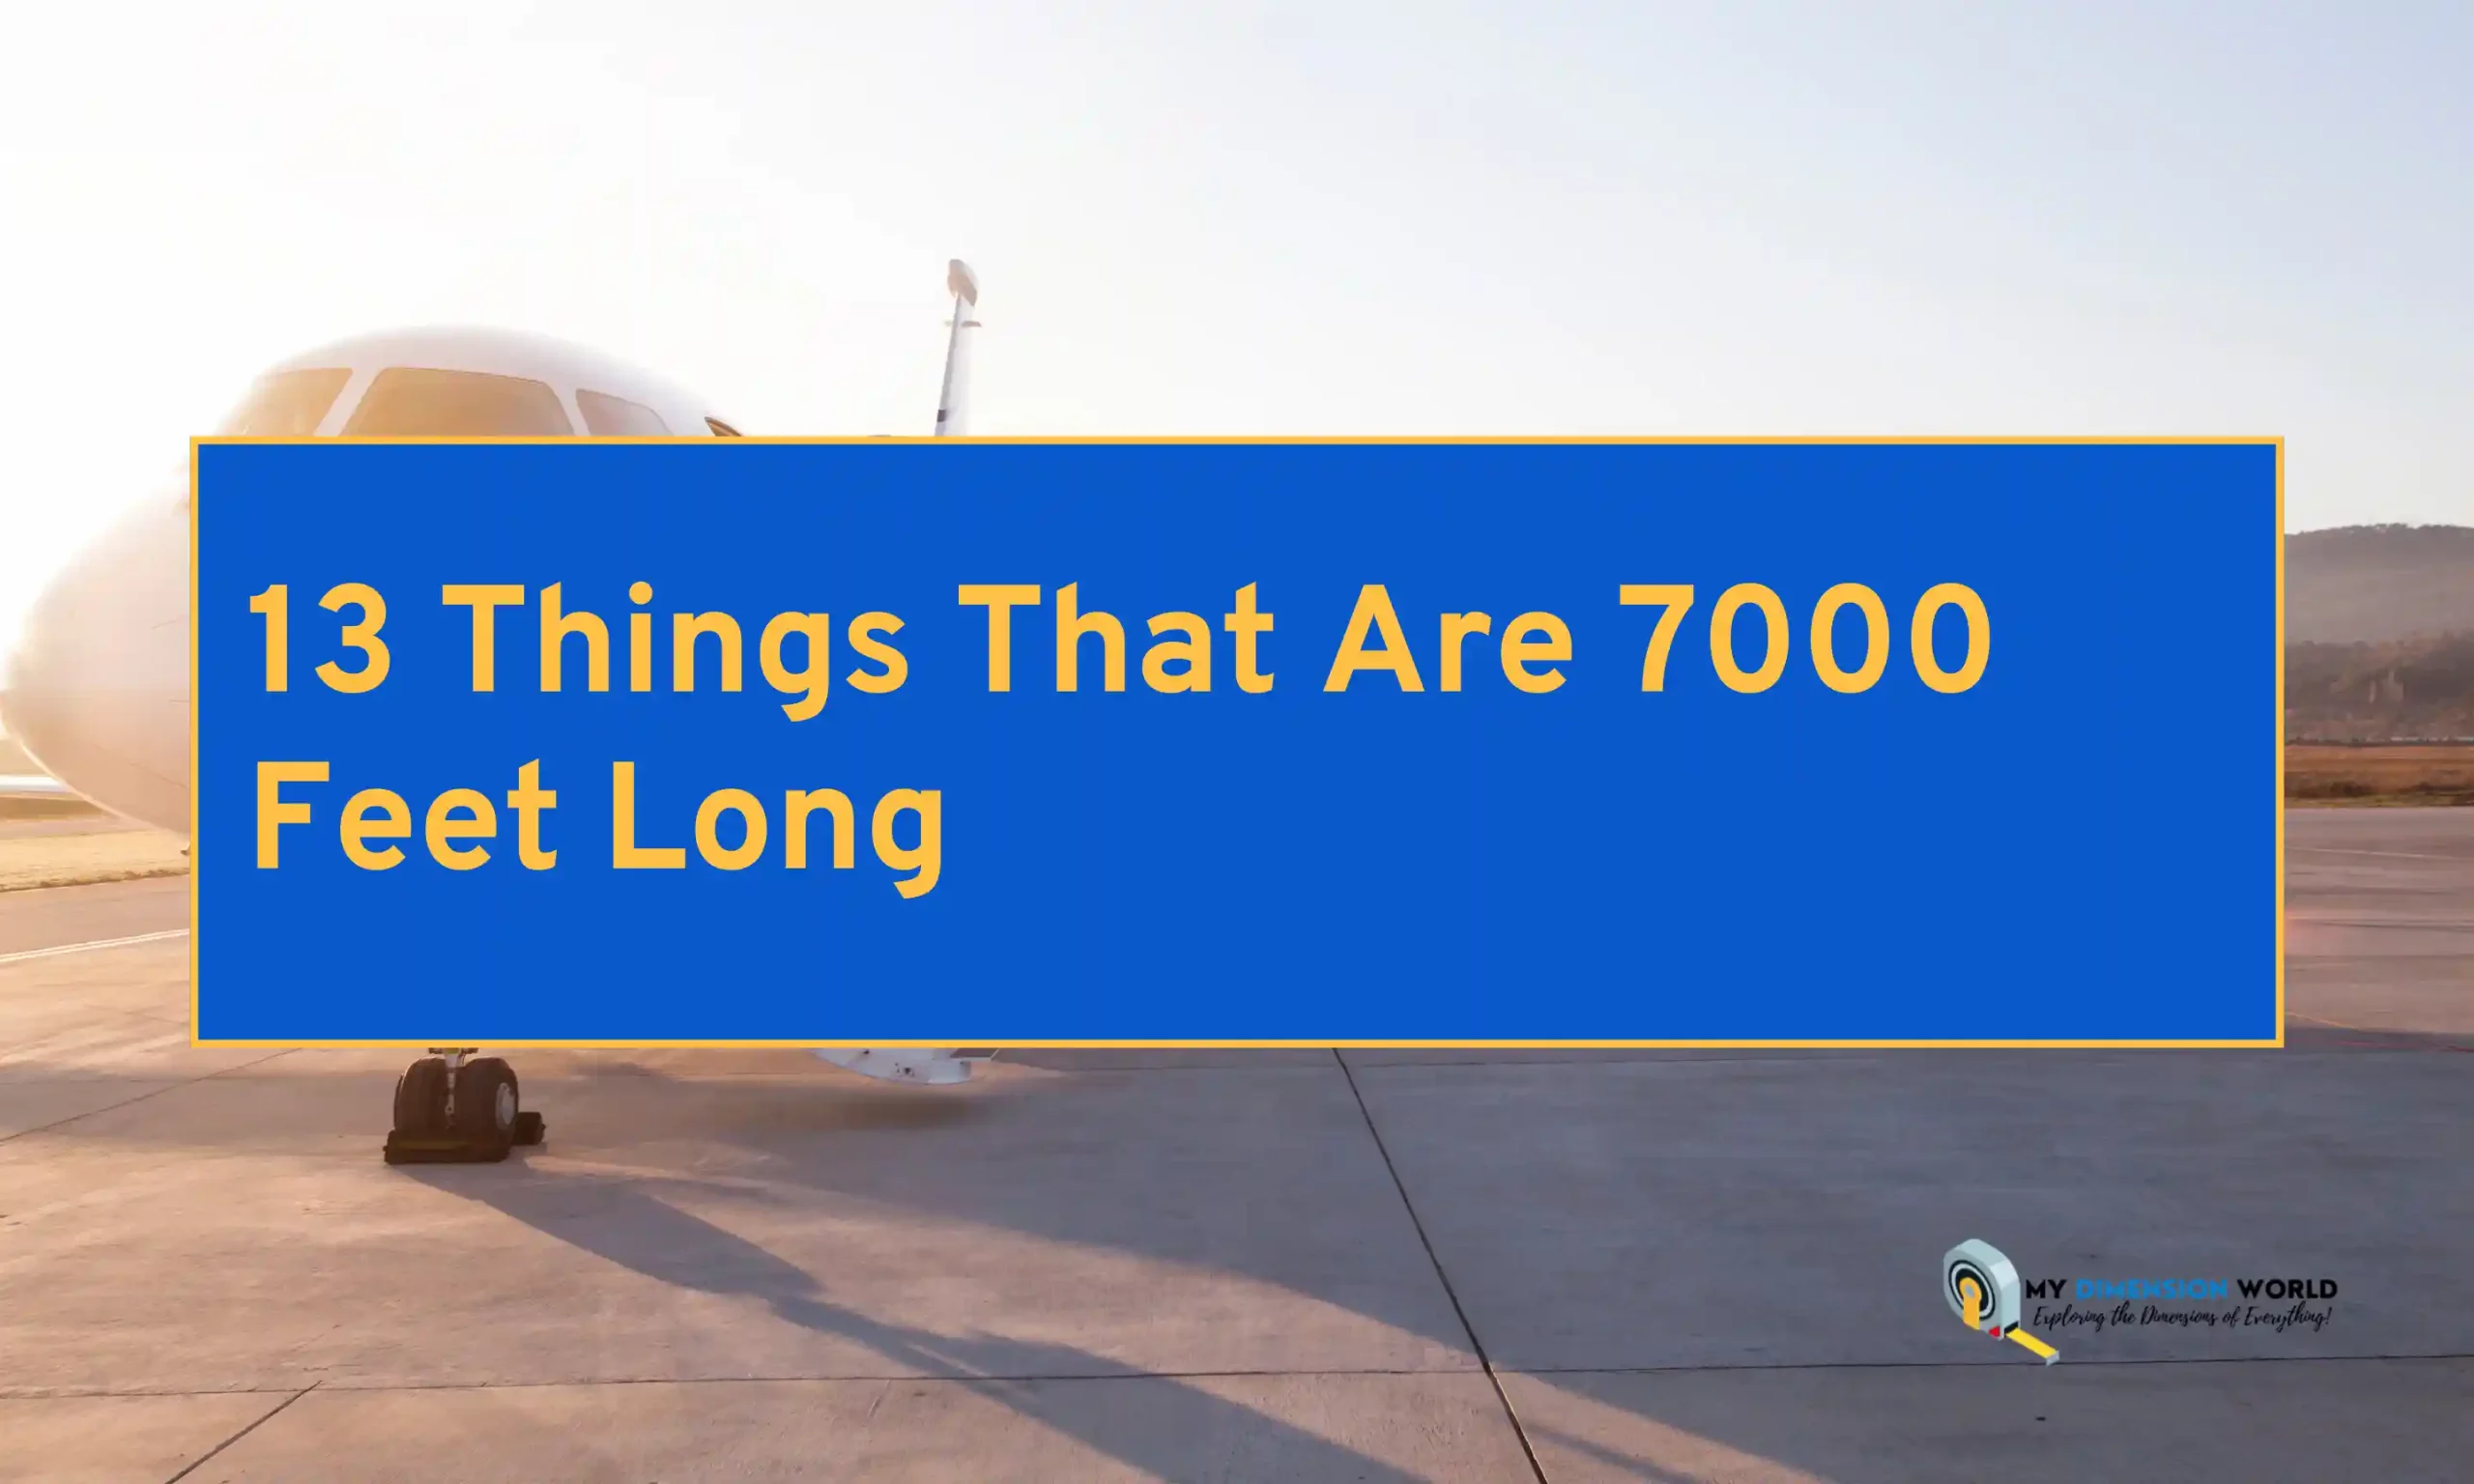 13 Things That Are 7000 Feet Long